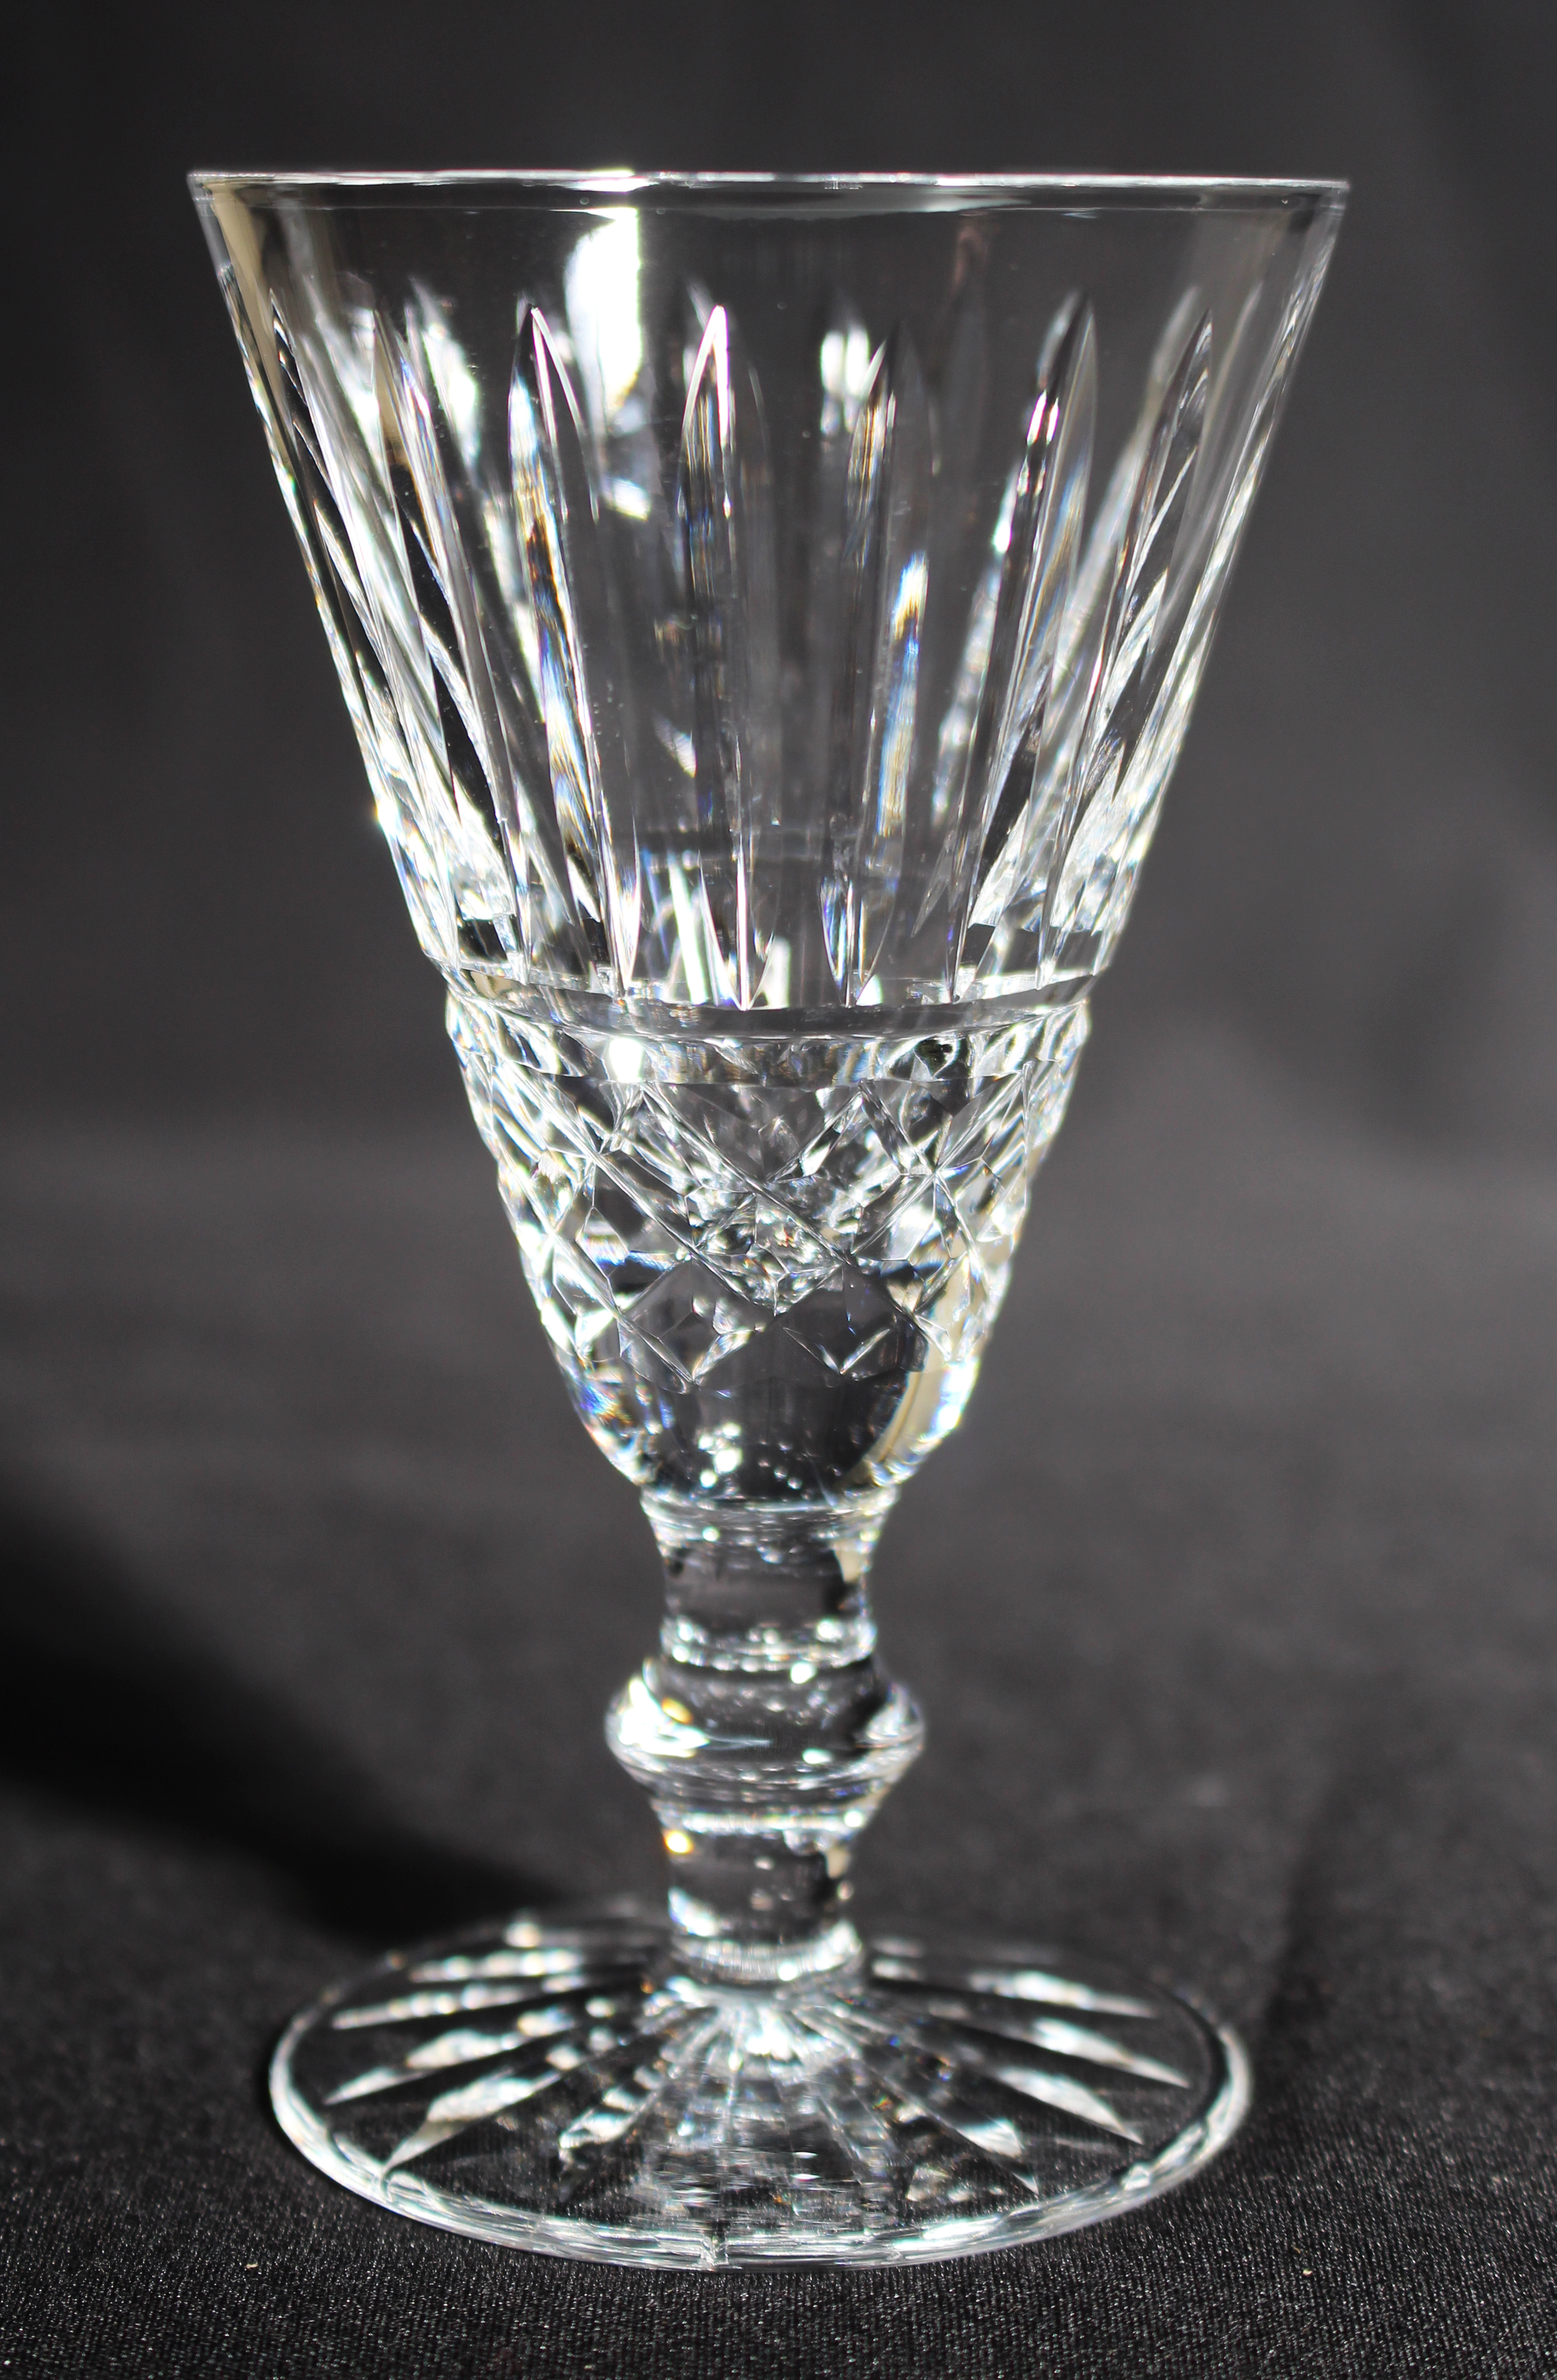 Set of 6 Vintage Waterford Cut Crystal Knopped Sherry Glasses - Image 5 of 6